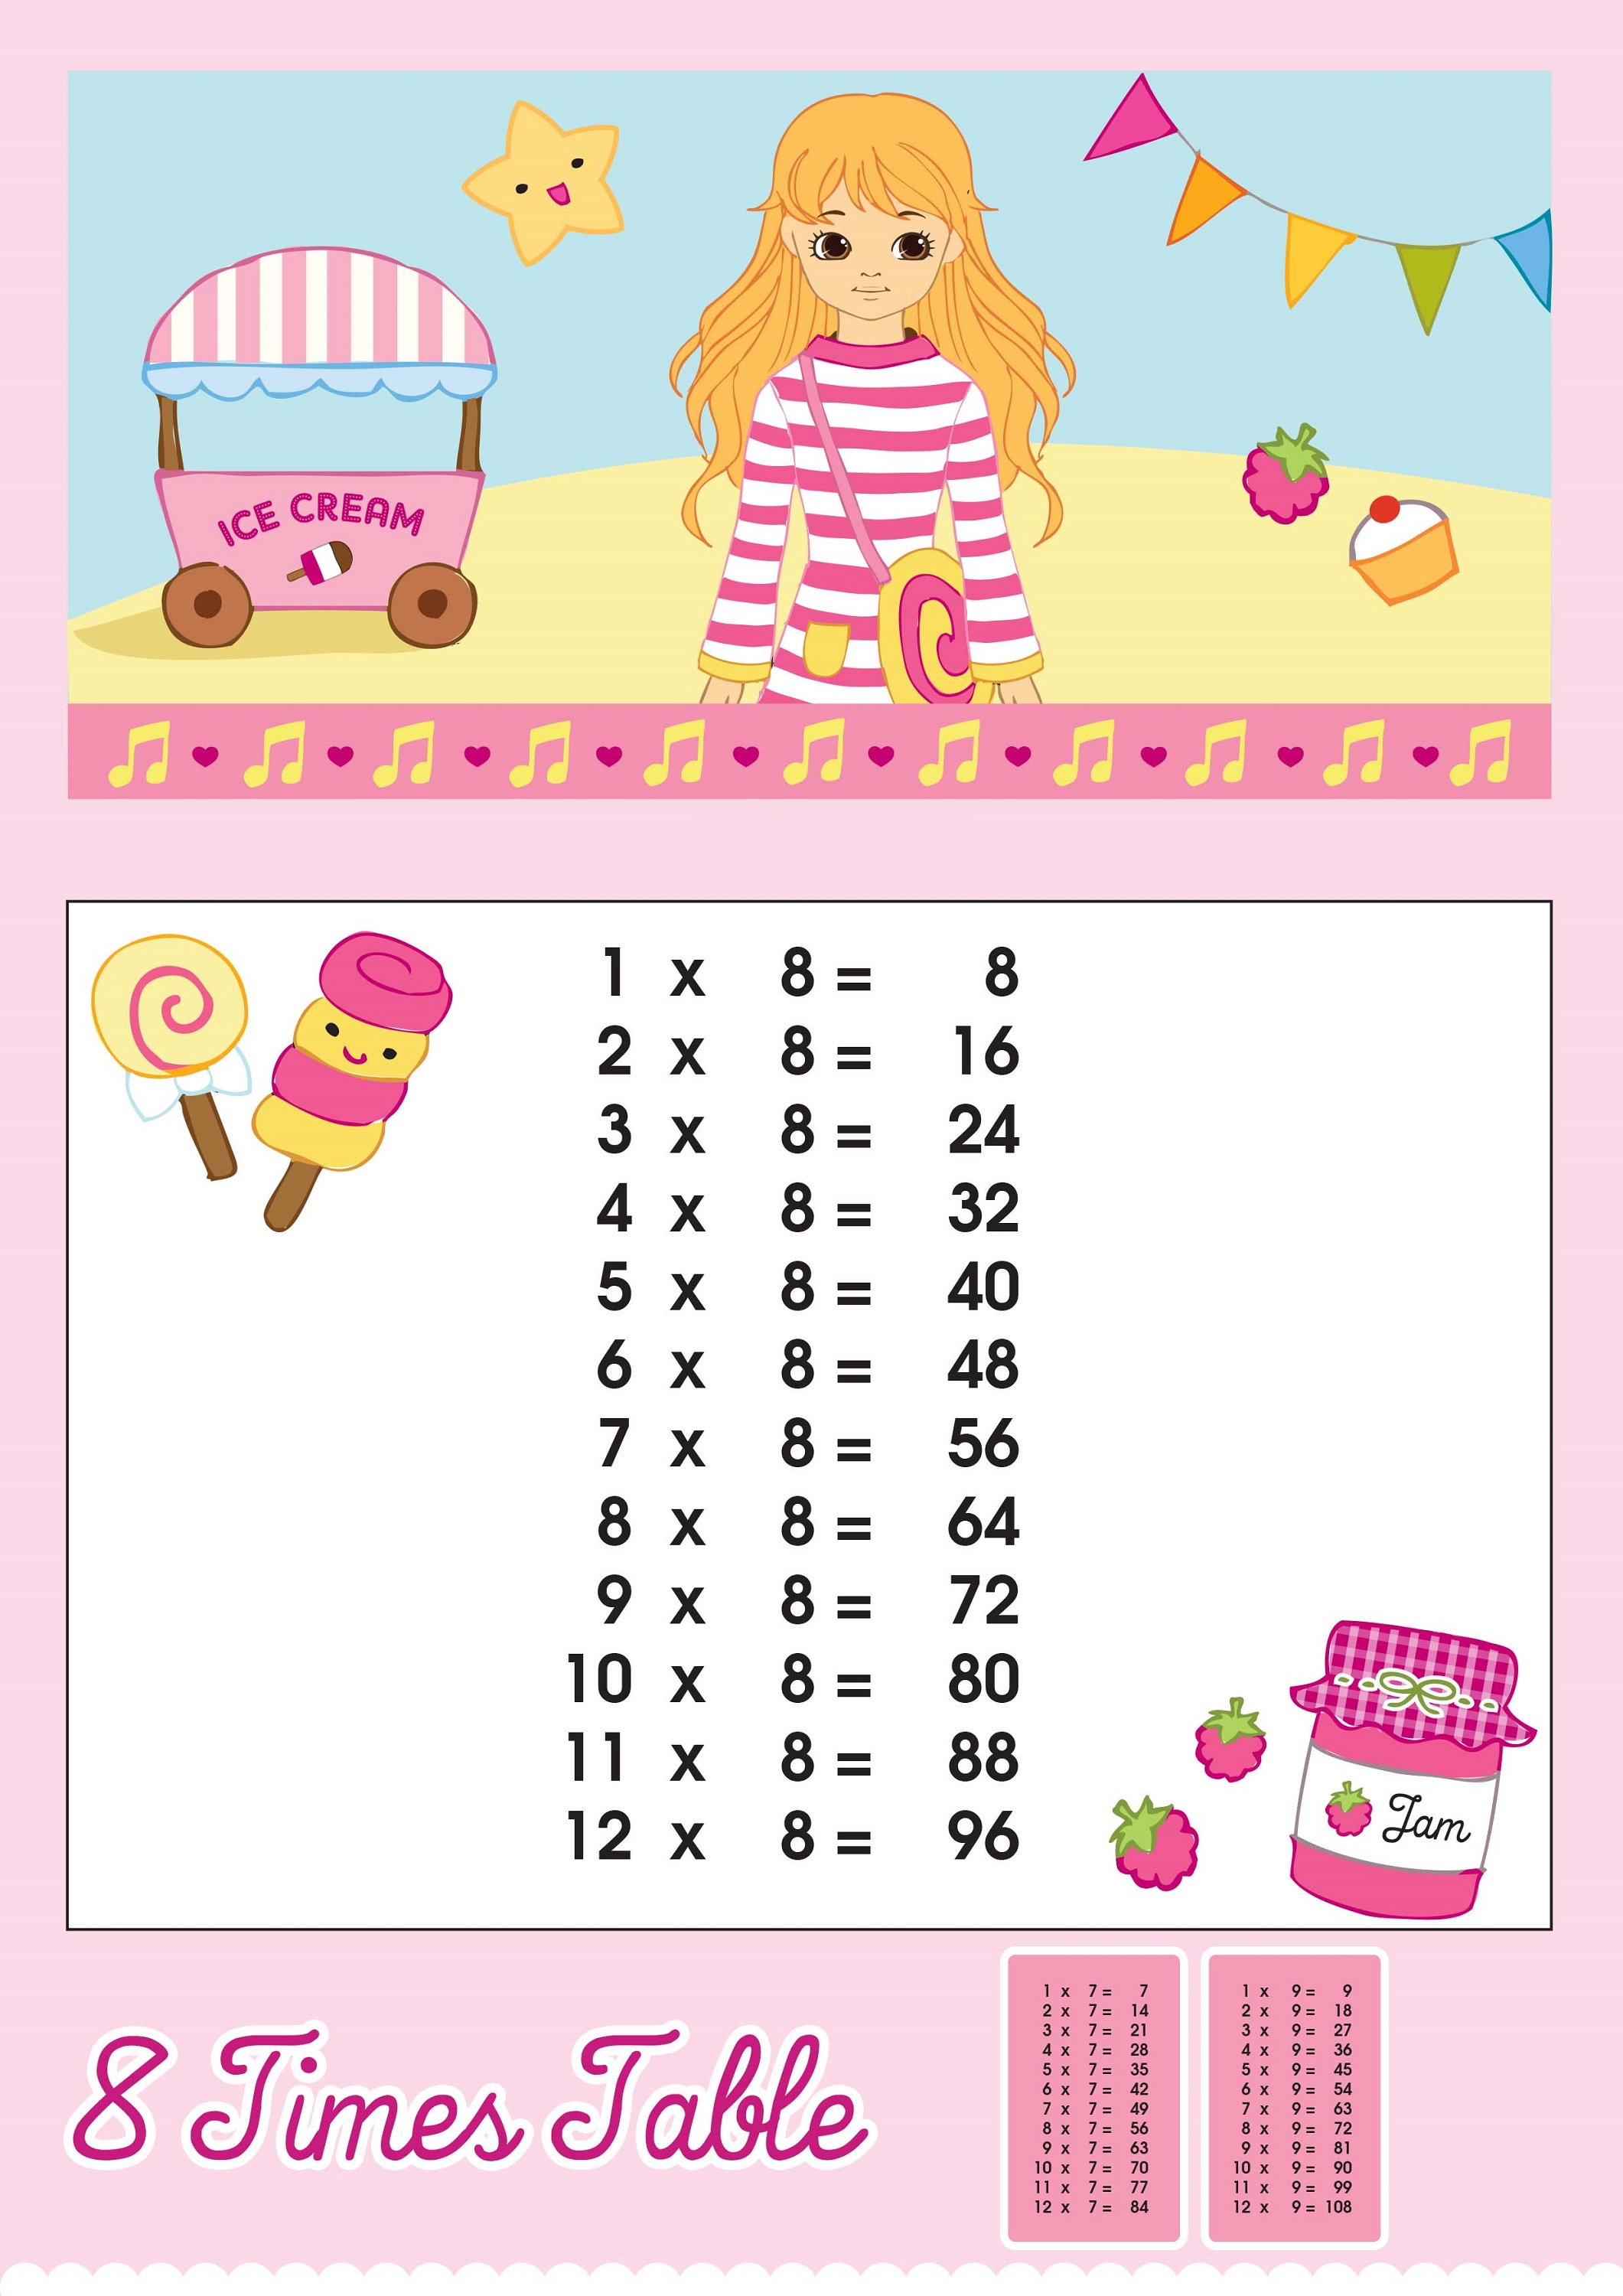 8 times table chart pink